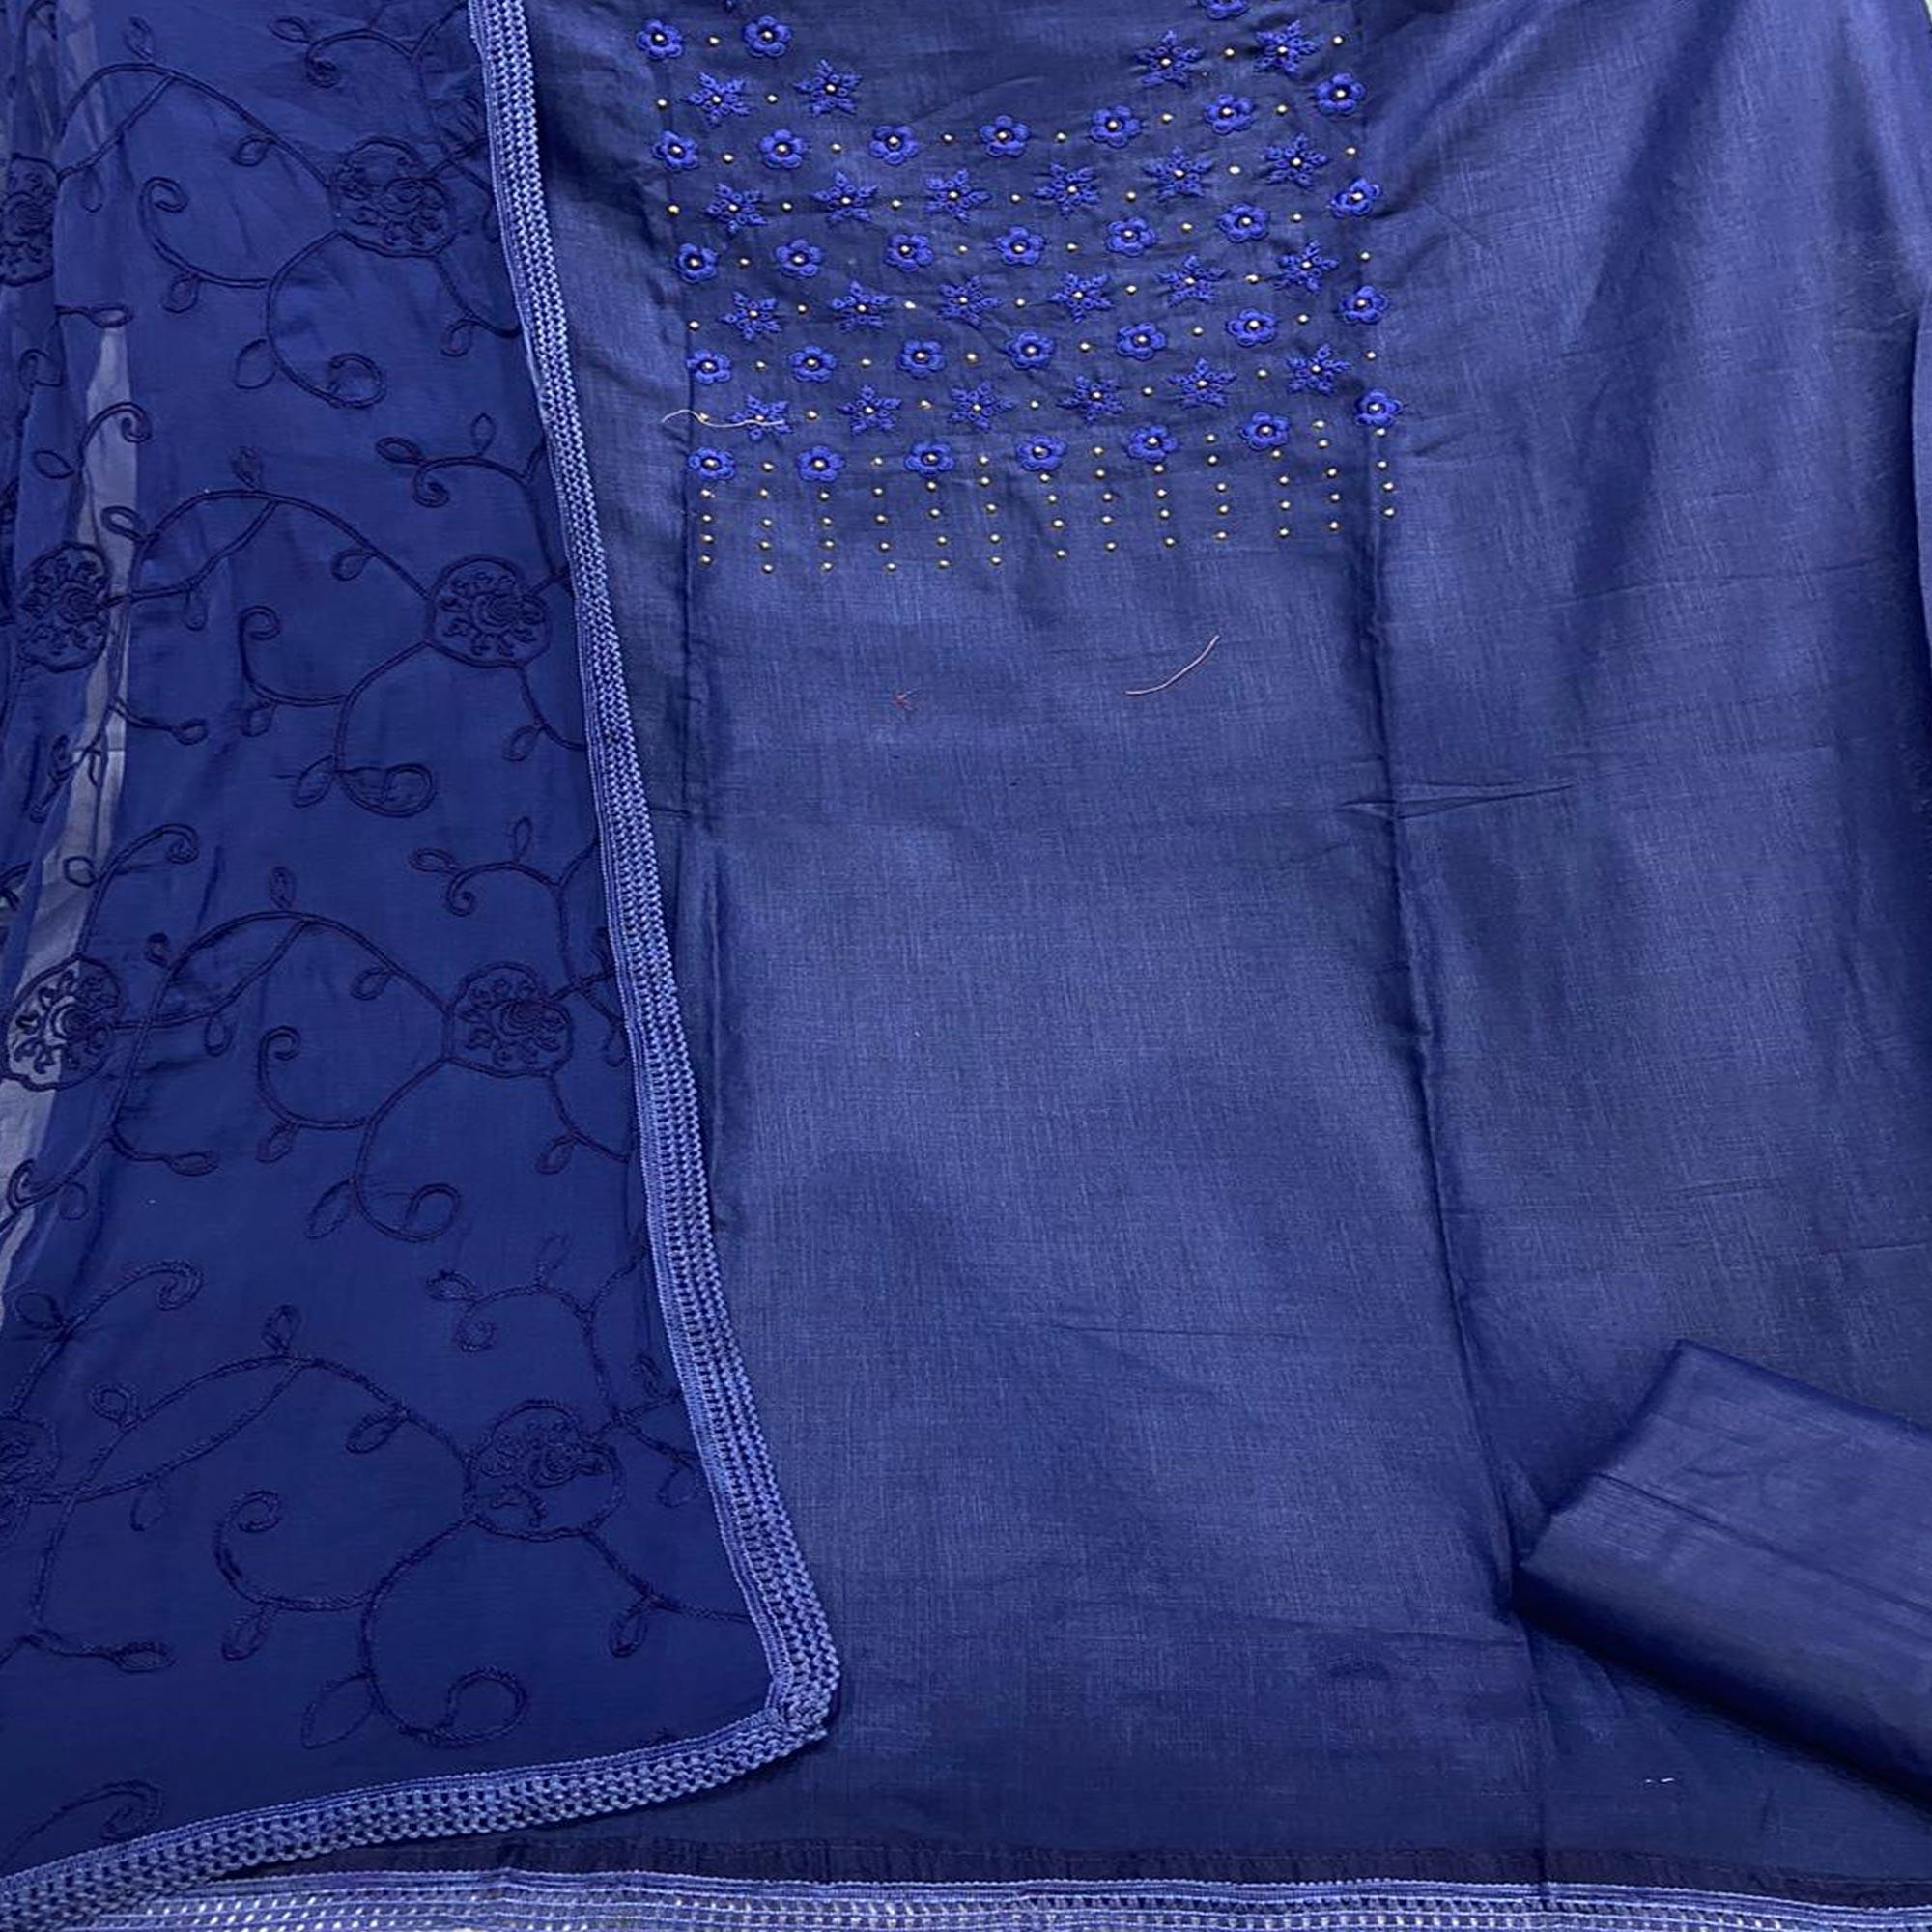 Sophisticated Navy Blue Colored Casual Wear Embroidered Cotton Dress Material - Peachmode